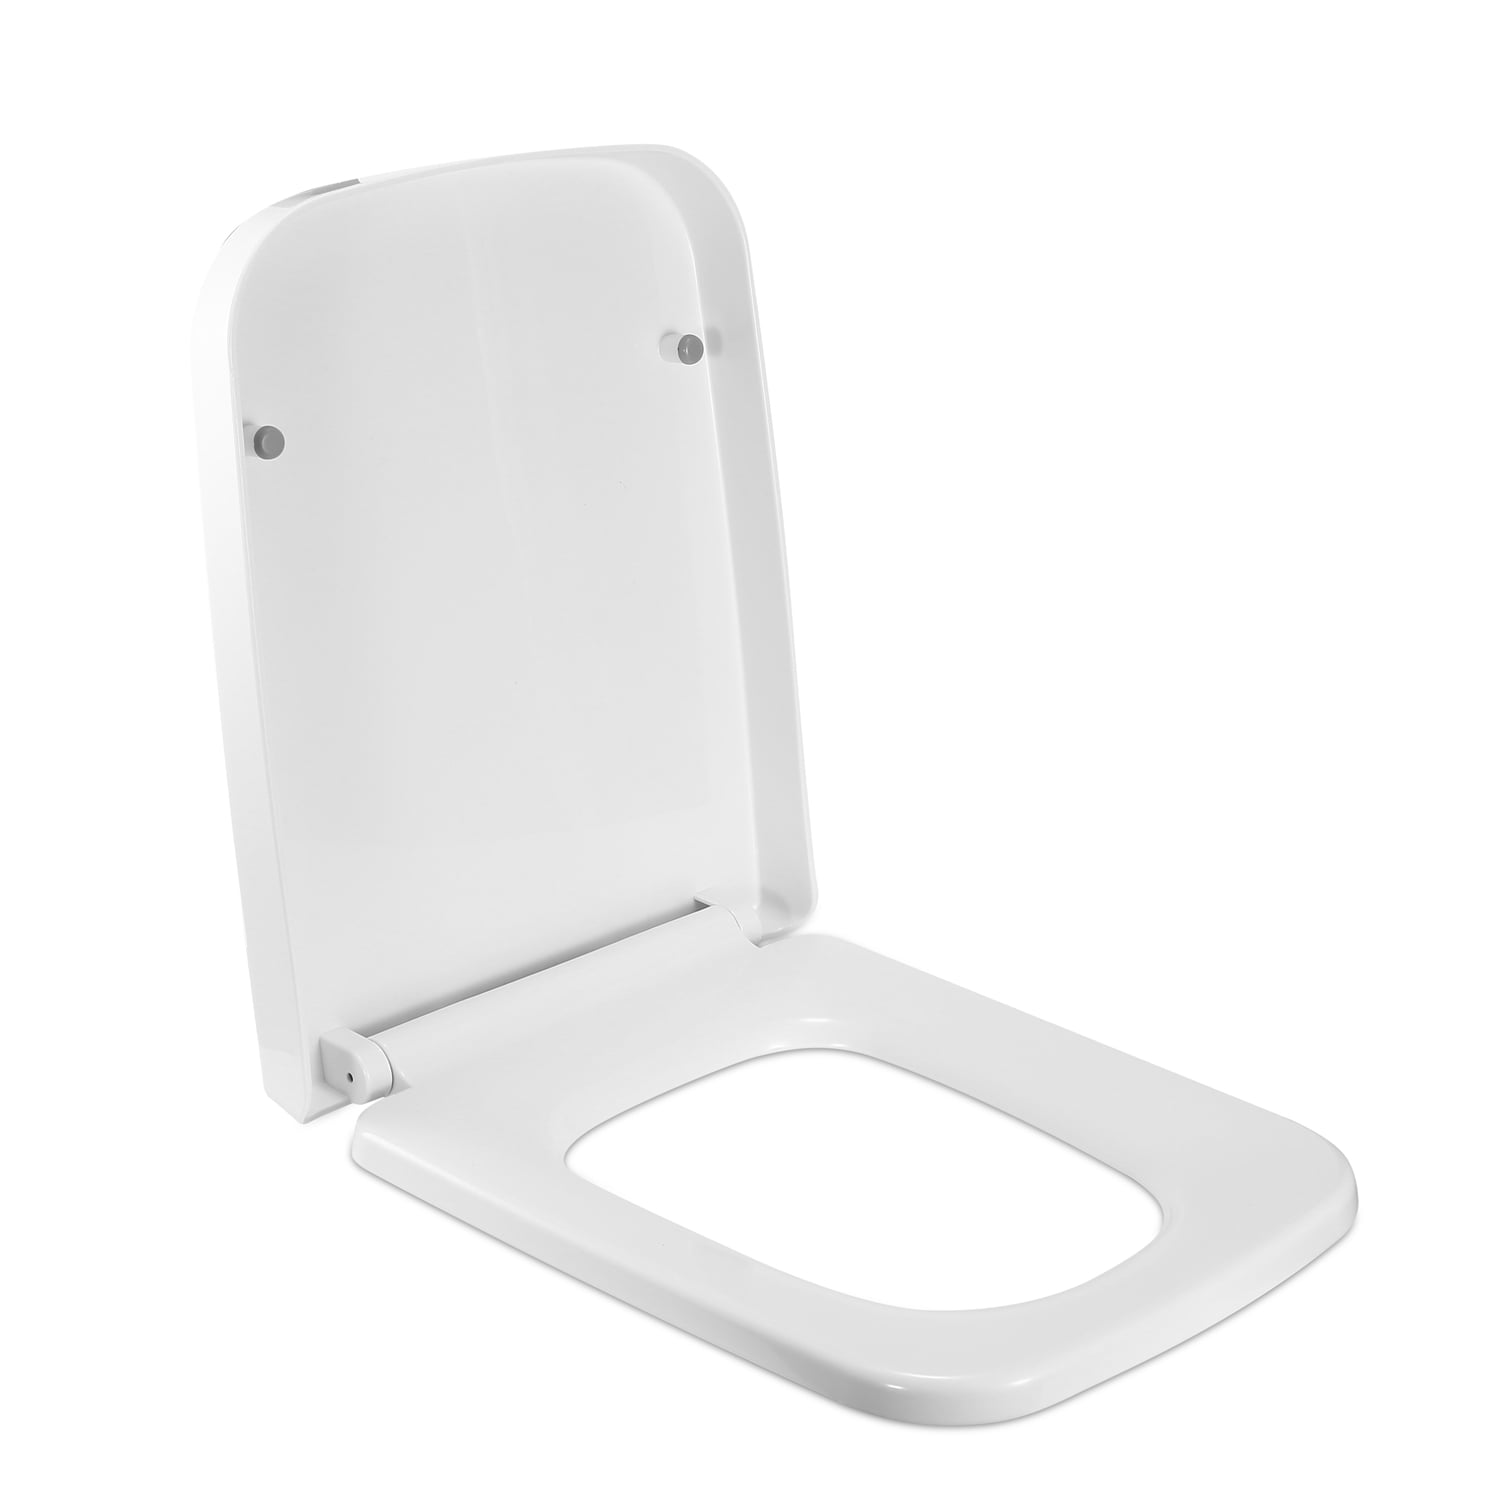 Square Toilet Seat Cover, iMounTEK Toilet Seat with Grip-Tight Seat  Bumpers, Heavy-Duty Quiet-Close Quick-Release Easy Cleaning No Slam Toilet  Seat, White